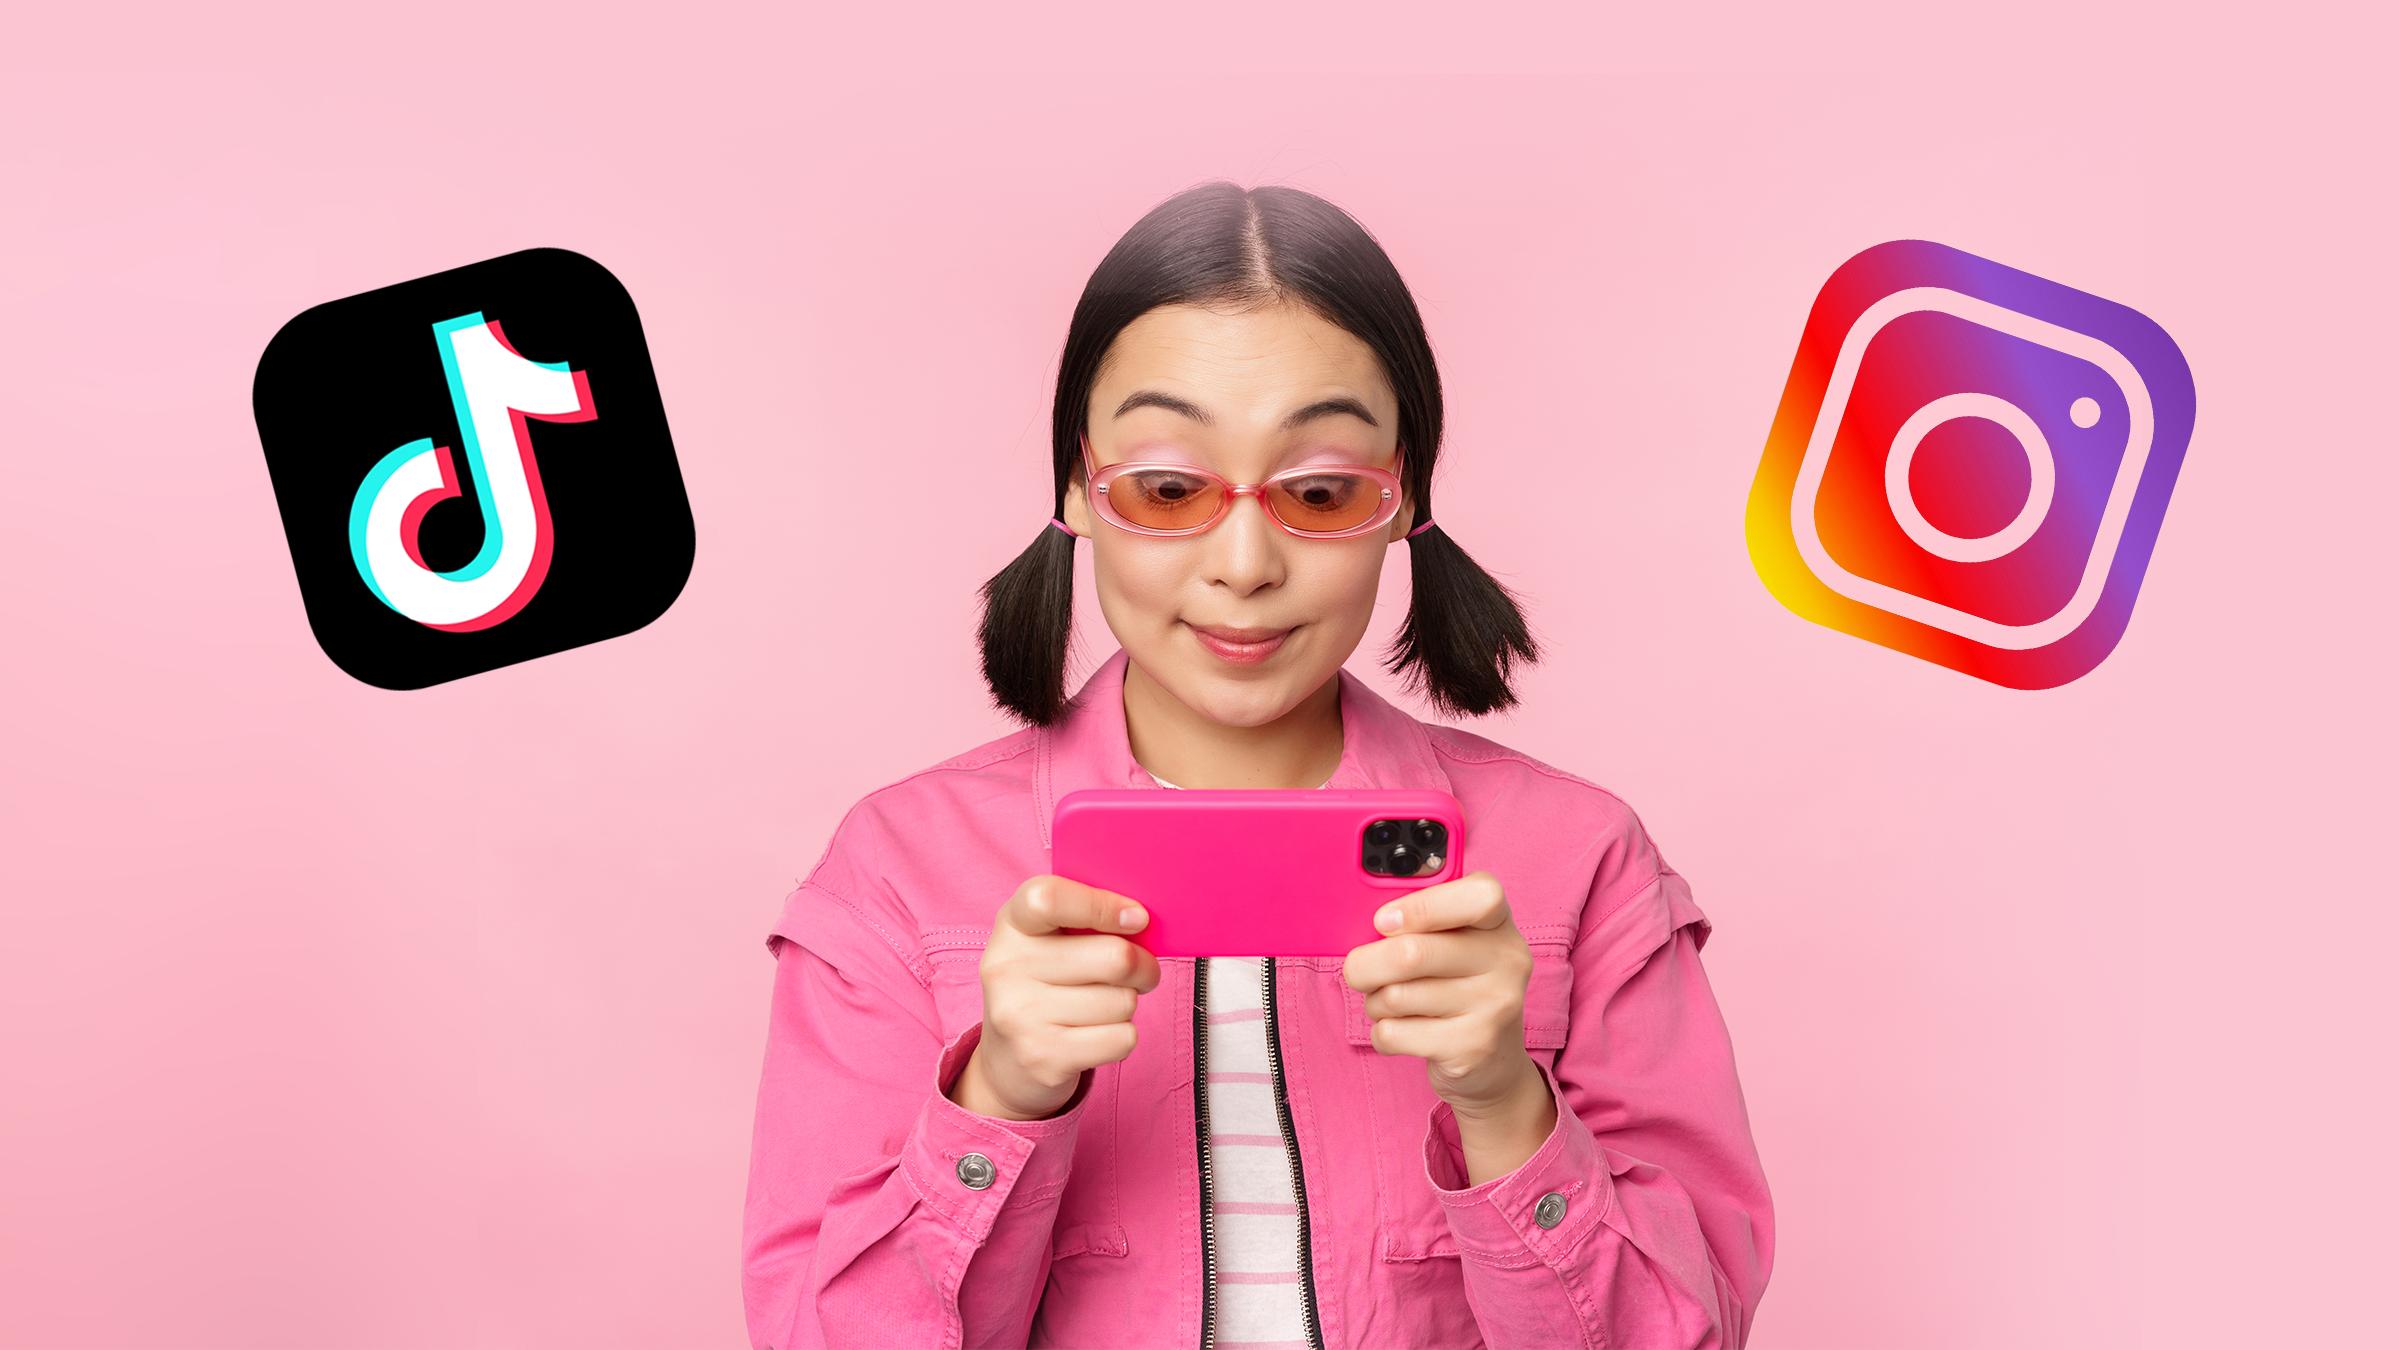 TikTok Ads vs. Instagram Reels: Which Platform is Best to Advertise Your Business?